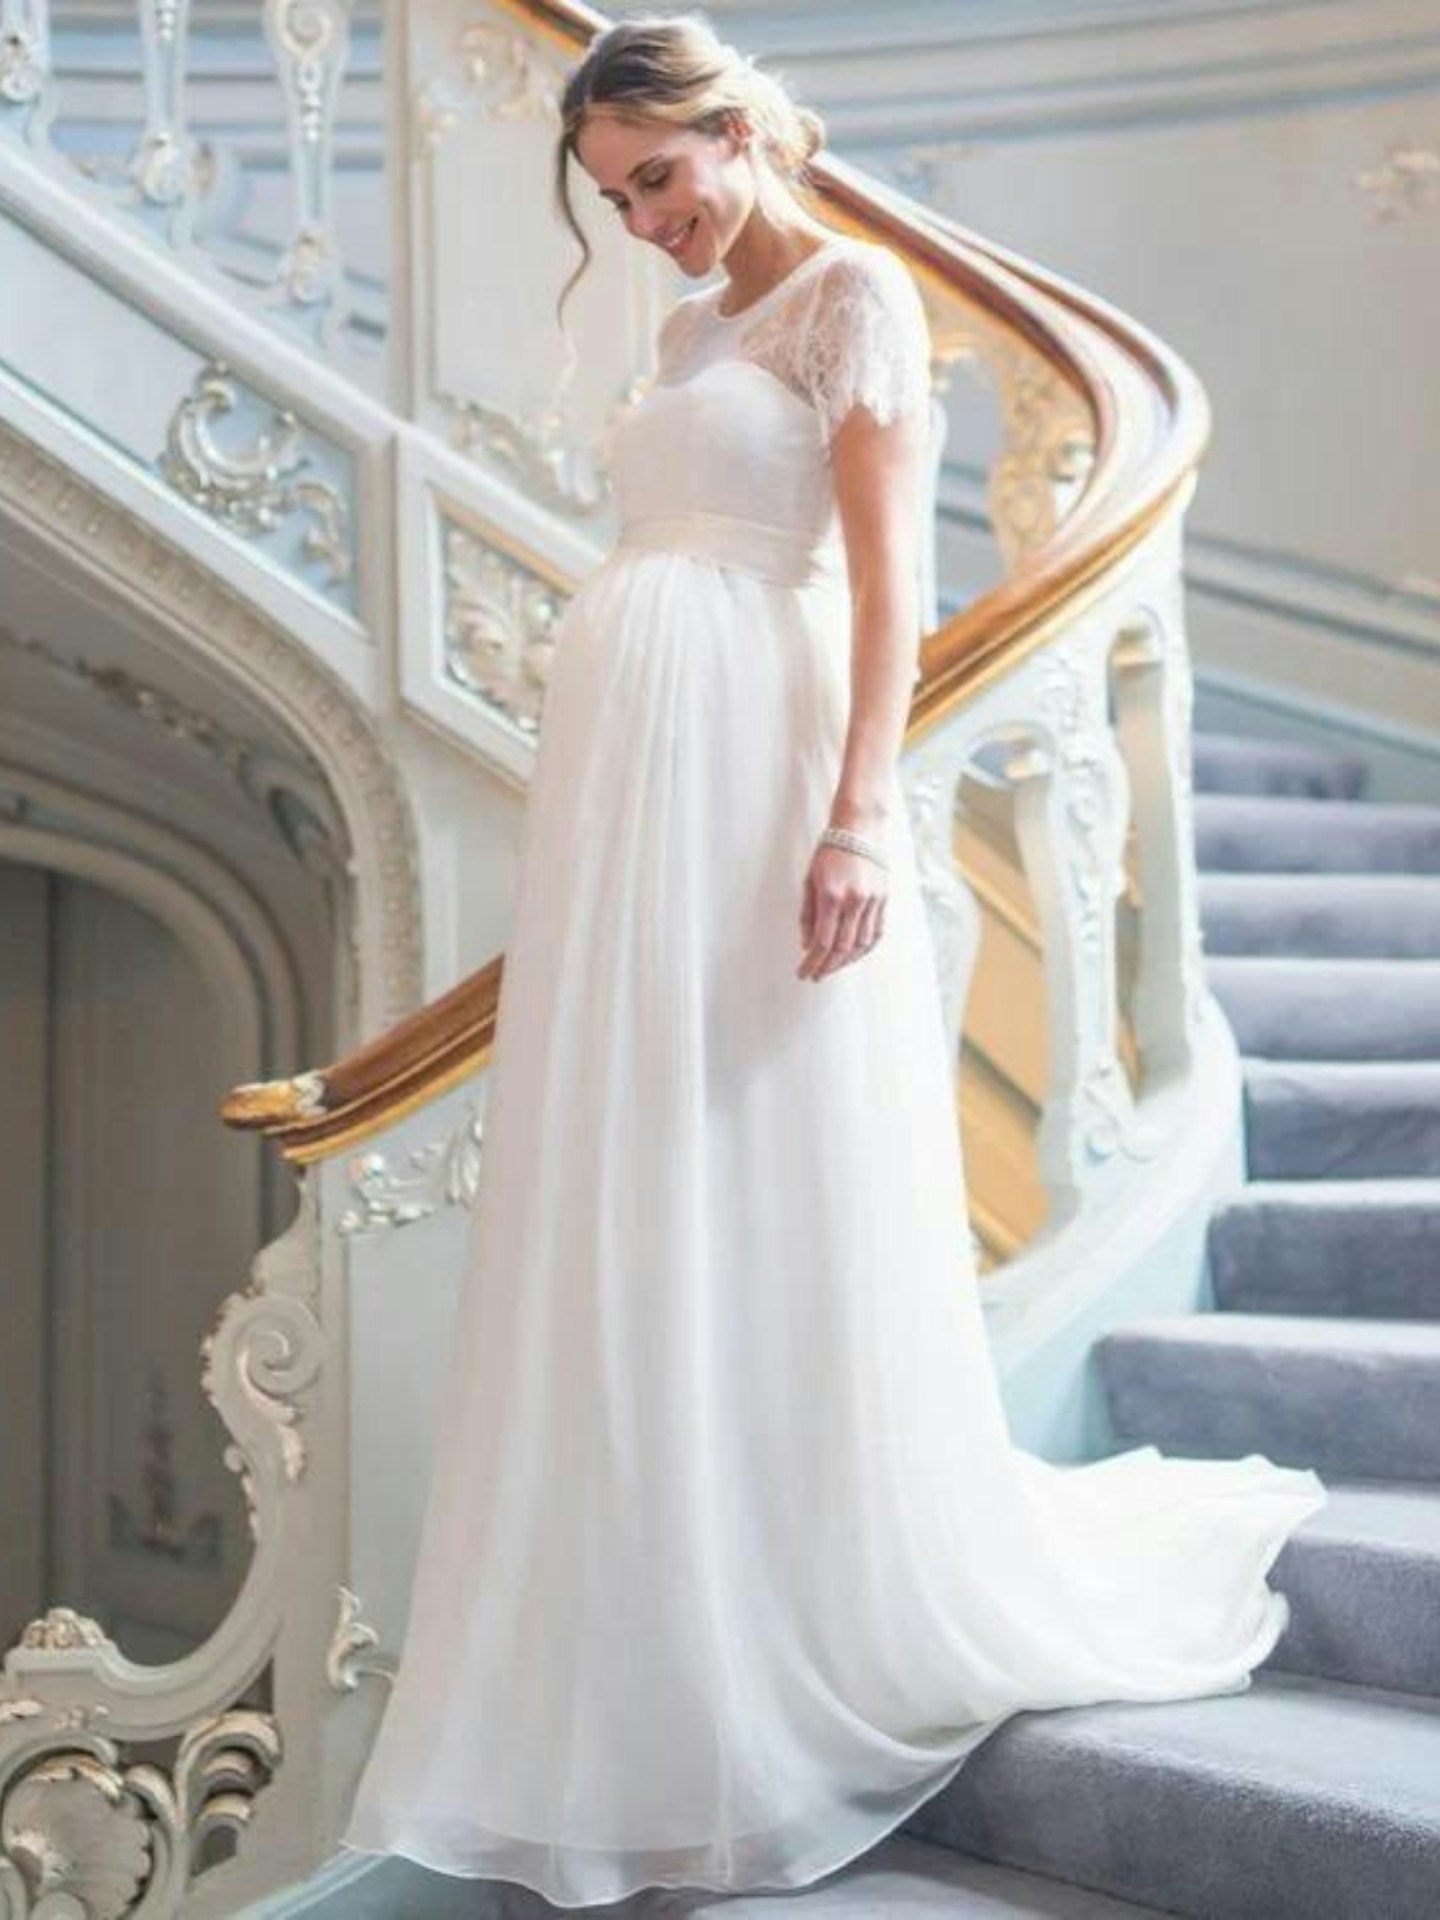 Ivory Lace & Silk Maternity Gown